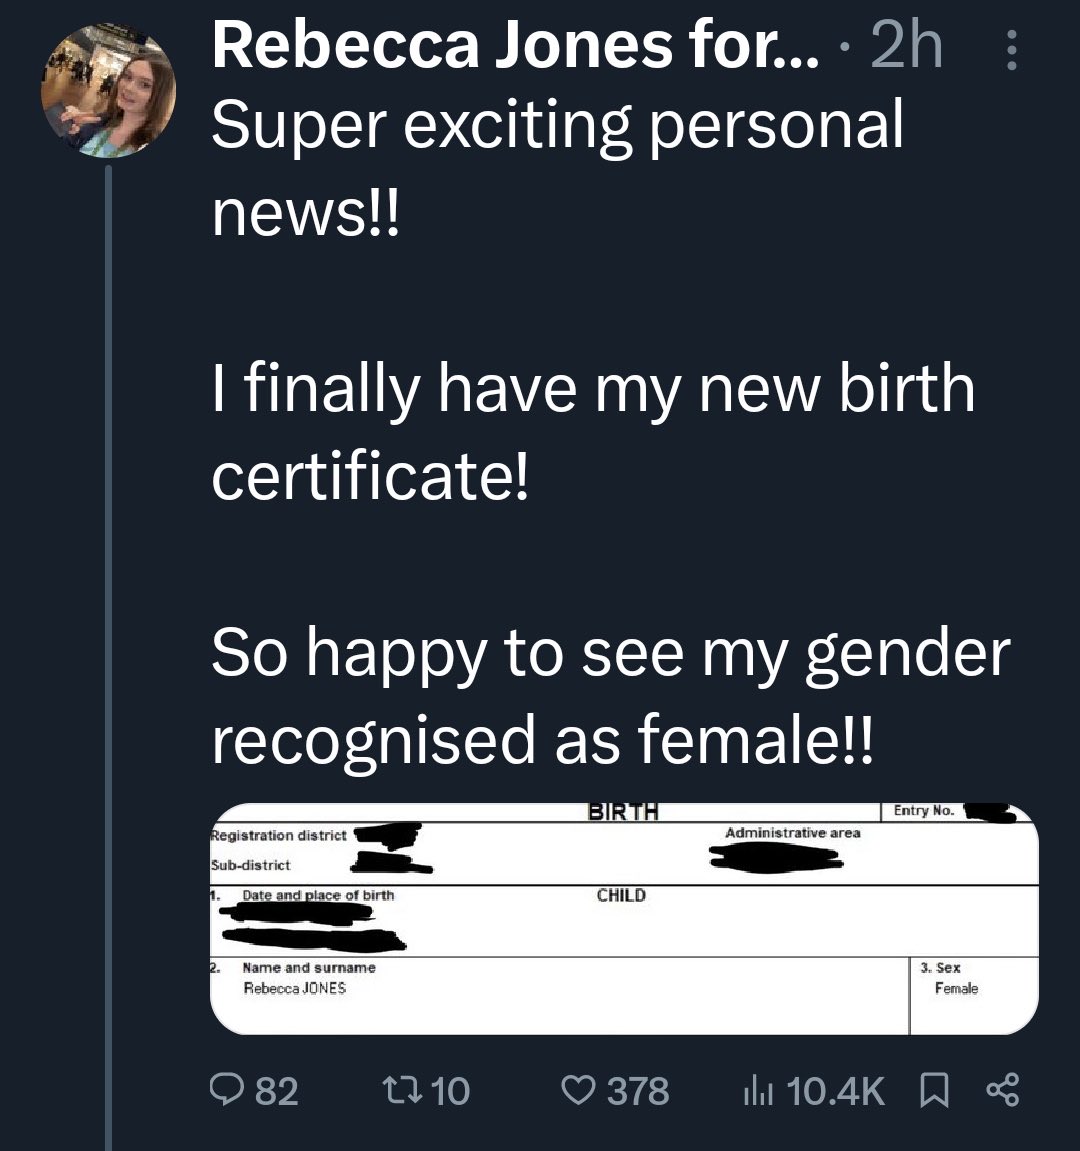 You know who DOESN’T need to change their gender to female on their birth certificate?

Women.